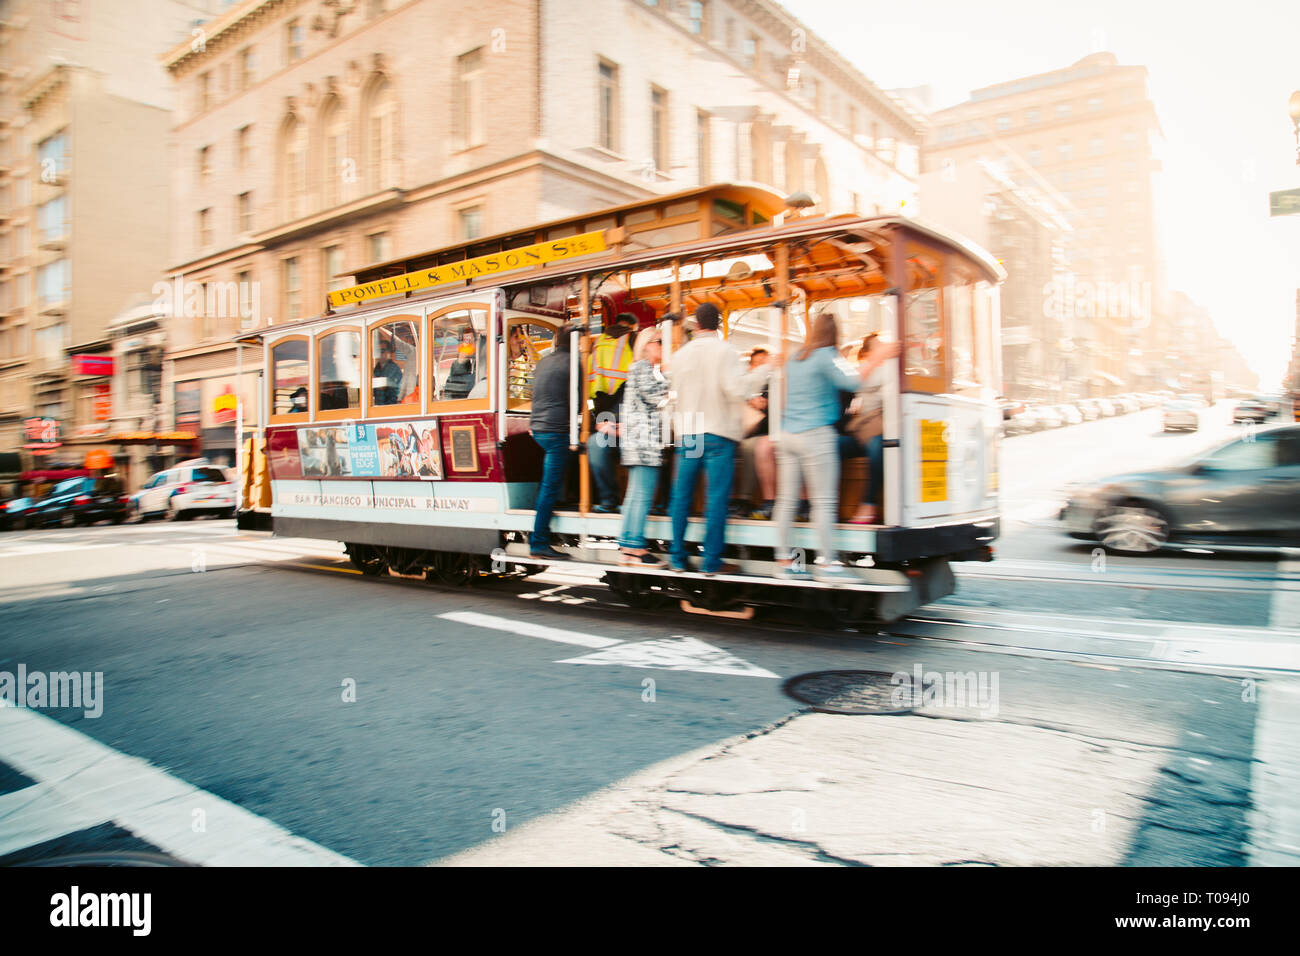 SEPTEMBER 5, 2016 - SAN FRANCISCO: Traditional Powell-Hyde cable car riding in central San Francisco in beautiful golden evening light at sunset, Cali Stock Photo